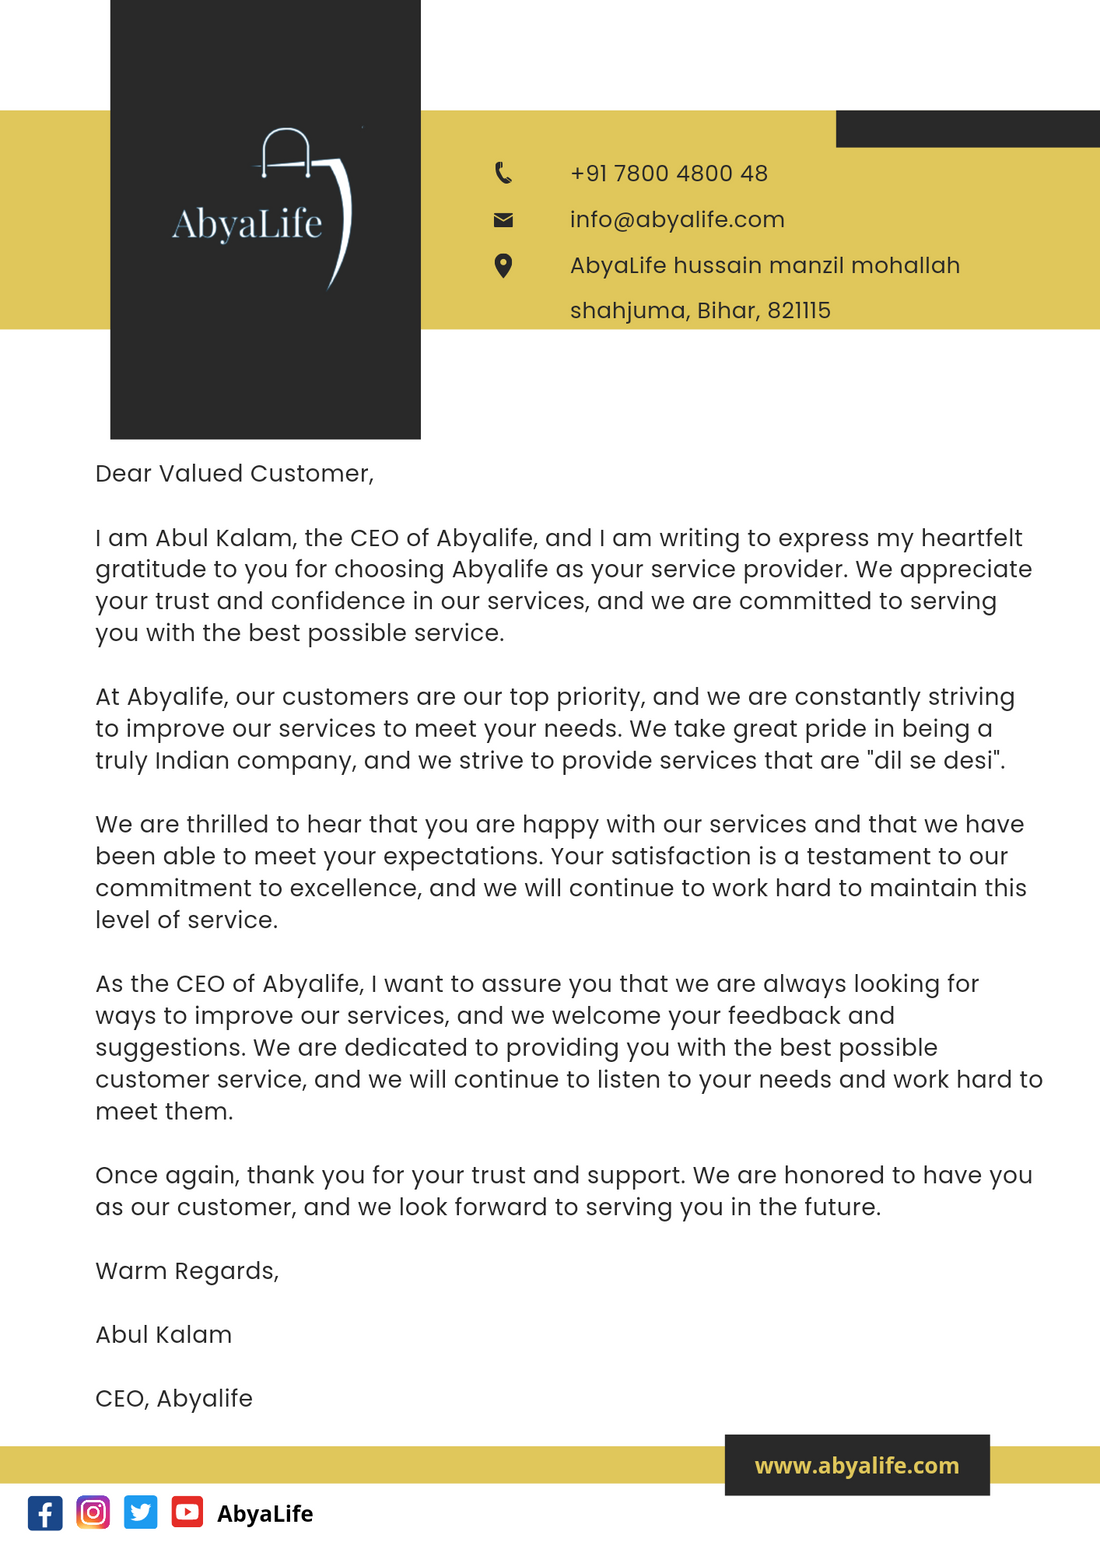 Thank you letter to AbyaLife Customer - AbyaLife